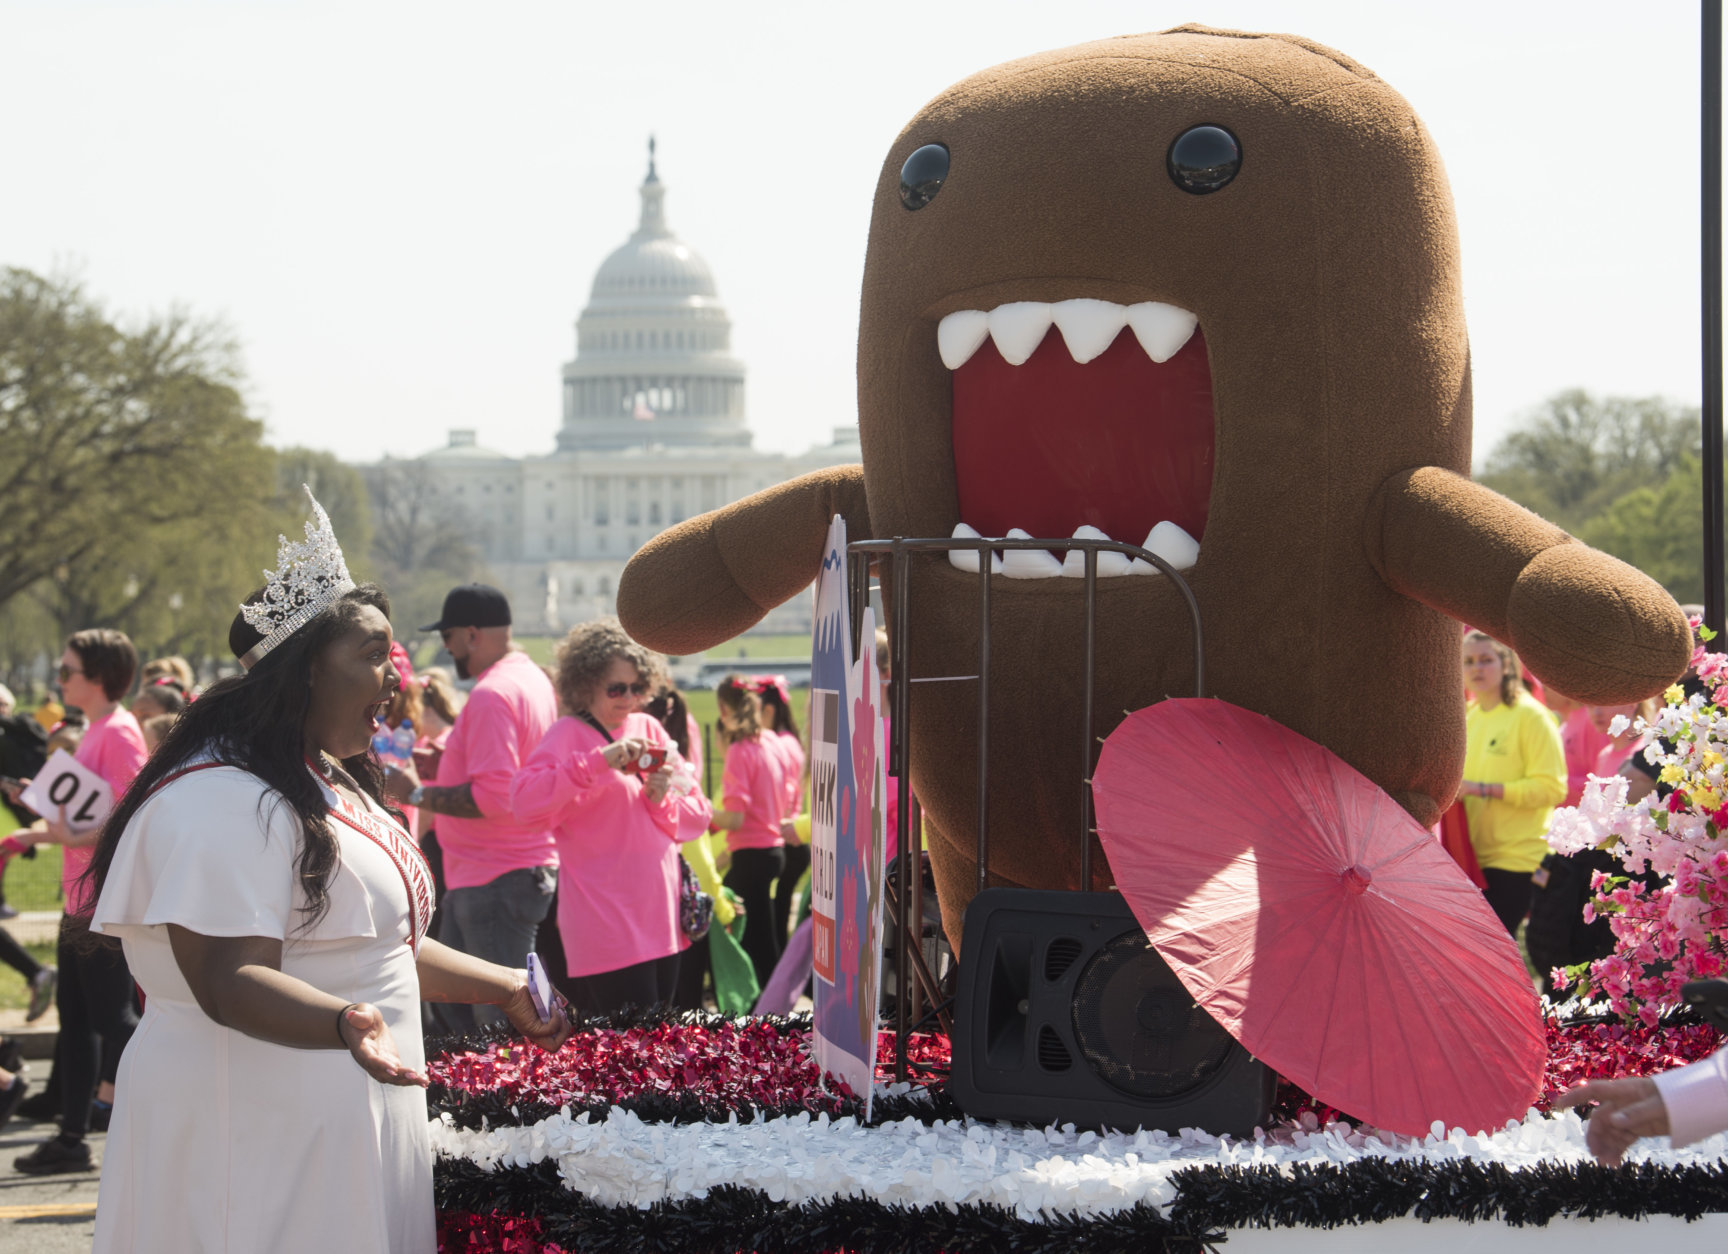 IMAGE DISTRIBUTED NHK WORLD - Miss University of the District of Columbia Tajah Franklin reacts to seeing NHK WORLD-JAPAN's mascot, Domo, at the start of the National Cherry Blossom Festival Parade on Saturday, April 14, 2018 in Washington. (Kevin Wolf/AP Images for NHK World)